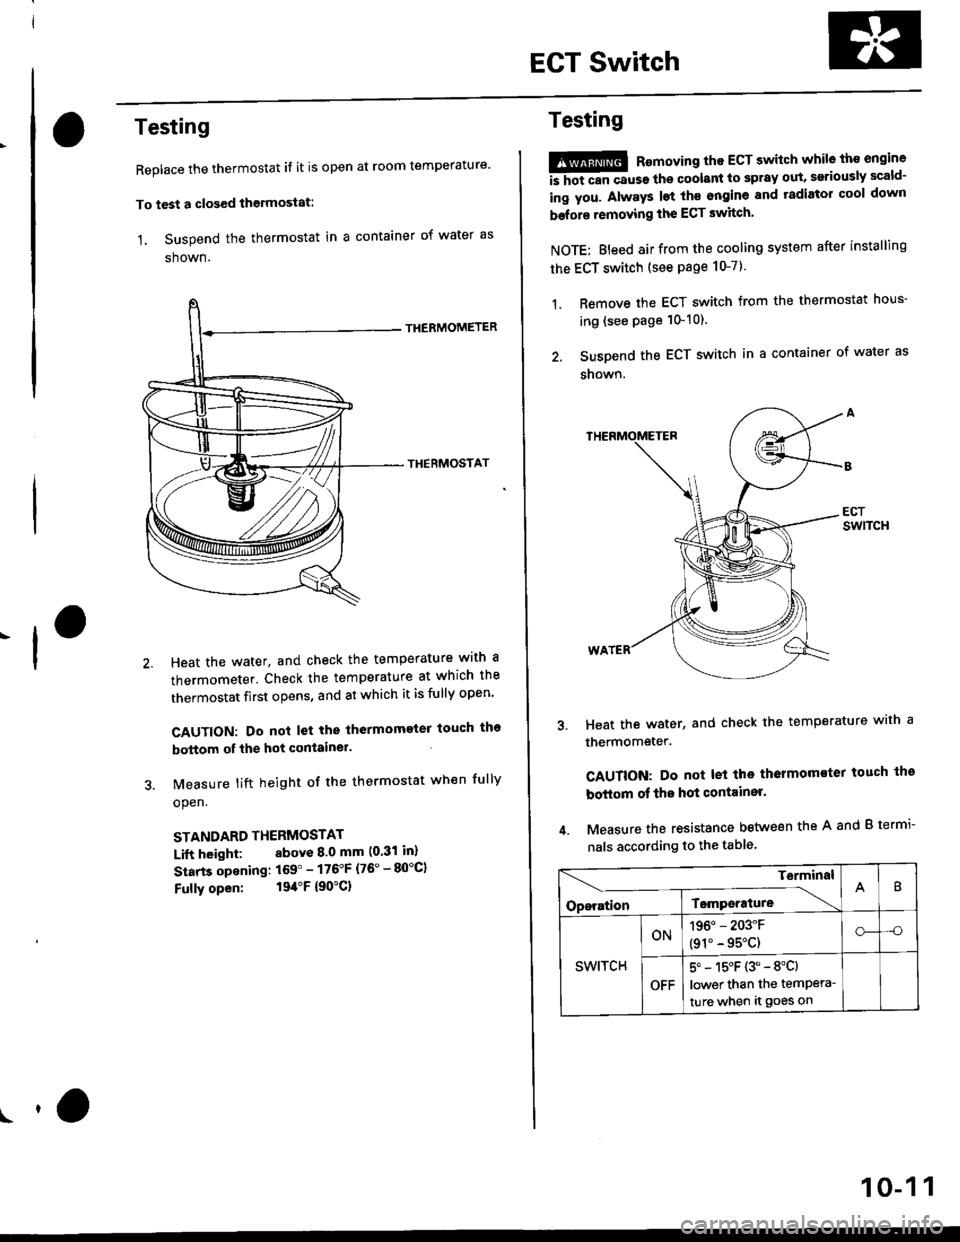 HONDA CIVIC 1996 6.G Workshop Manual EGT Switch
-f
Testing
Replace the thermostat if it is open at room temperature
To test a closed thermostat:
1, Suspend the thermostat in a container of water as
shown.
THEBMOMETER
THERMOSTAT
Heat the